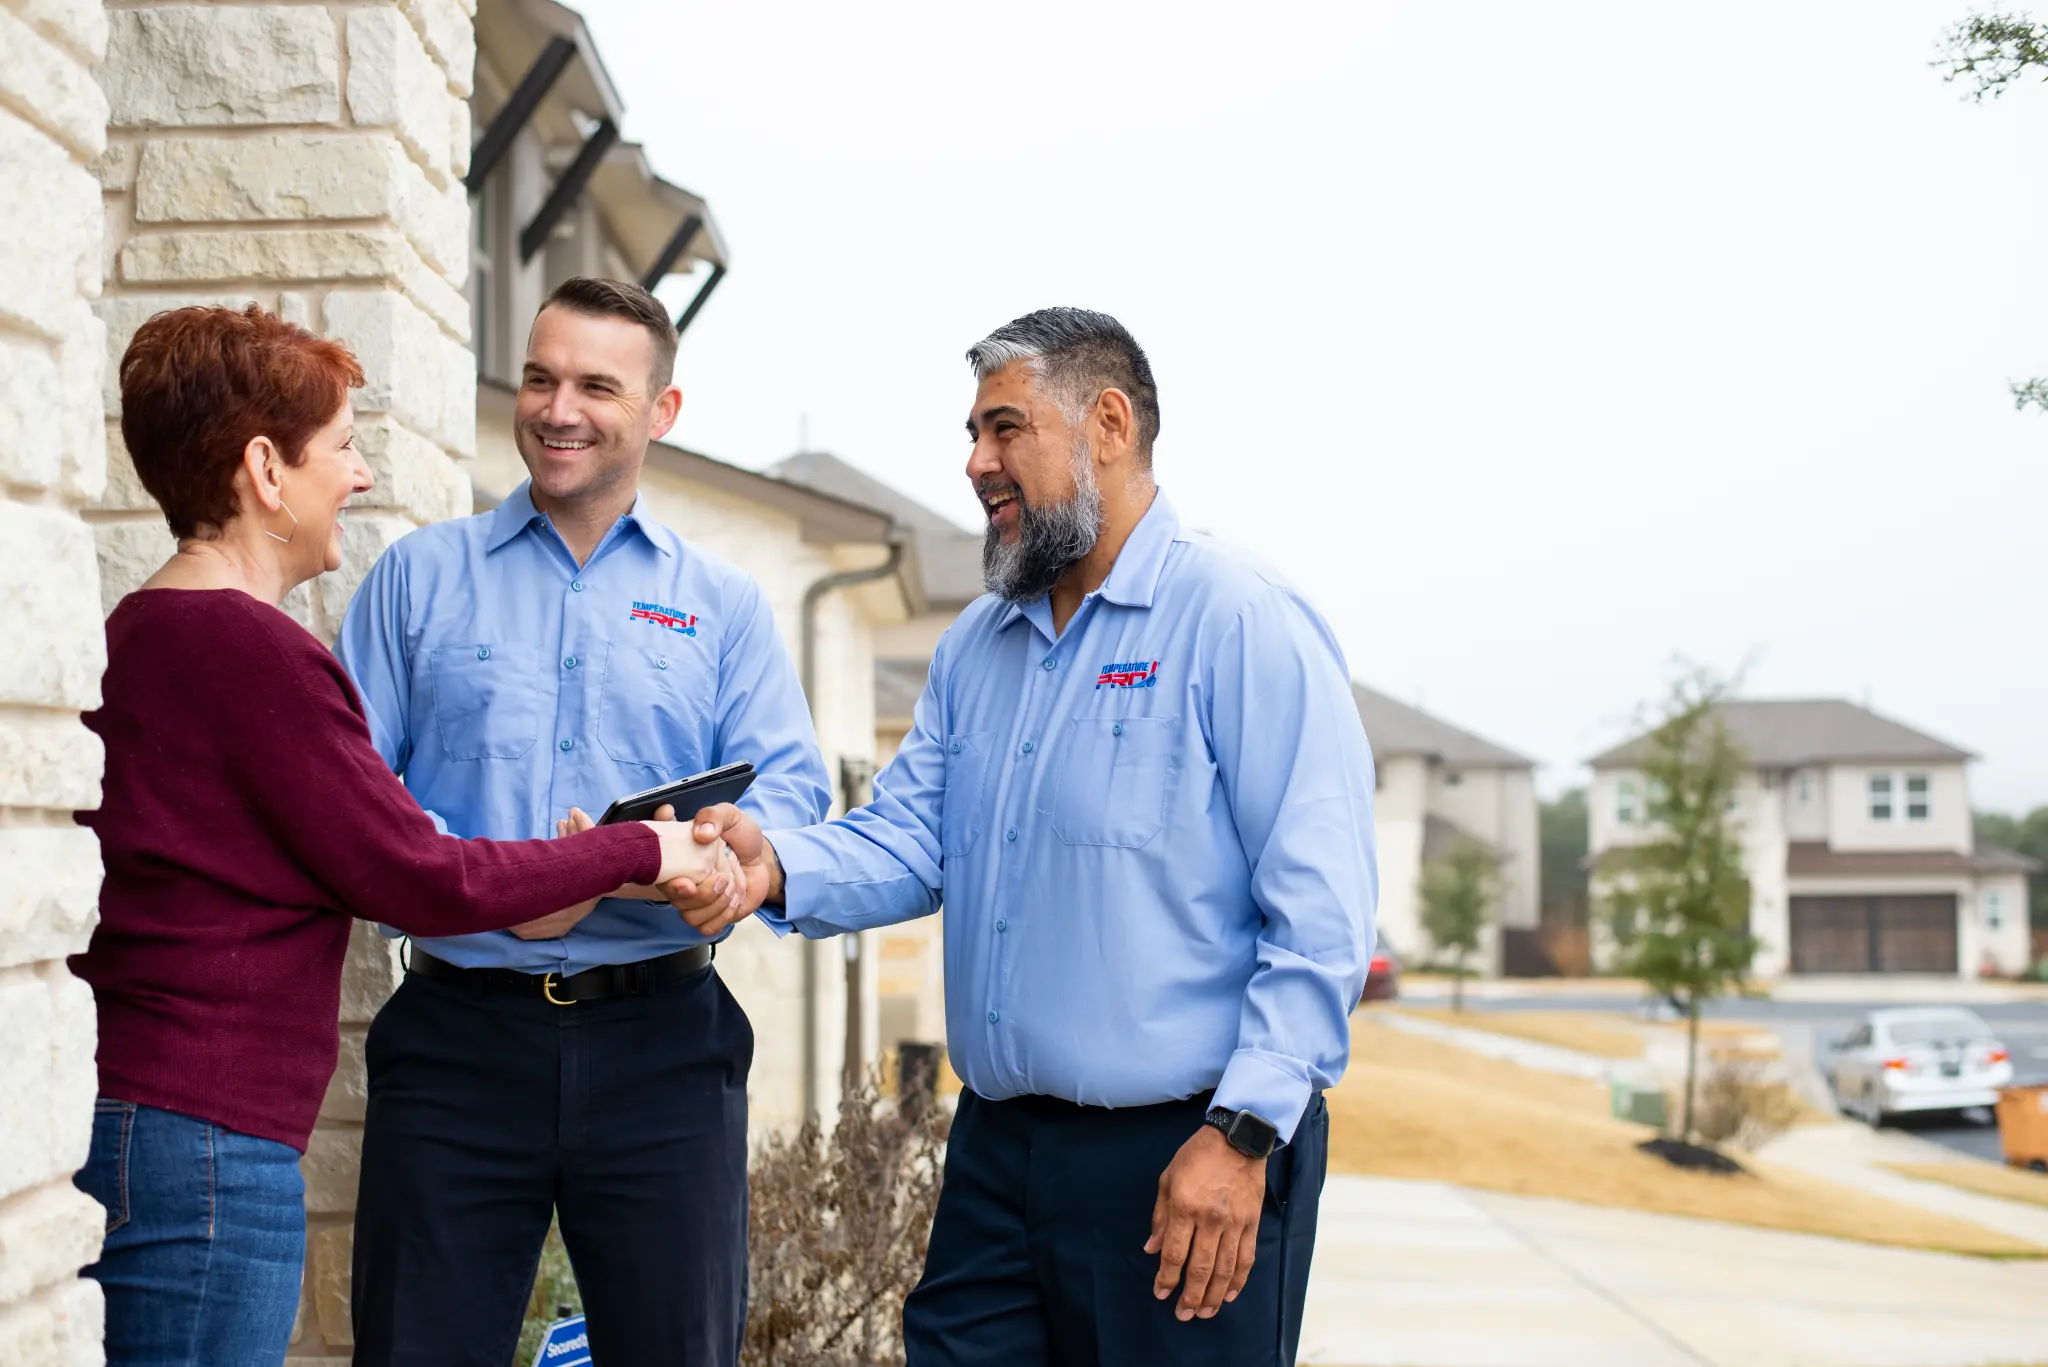 Buxmont heating technicians shaking hands with a customer after a heating inspection service.